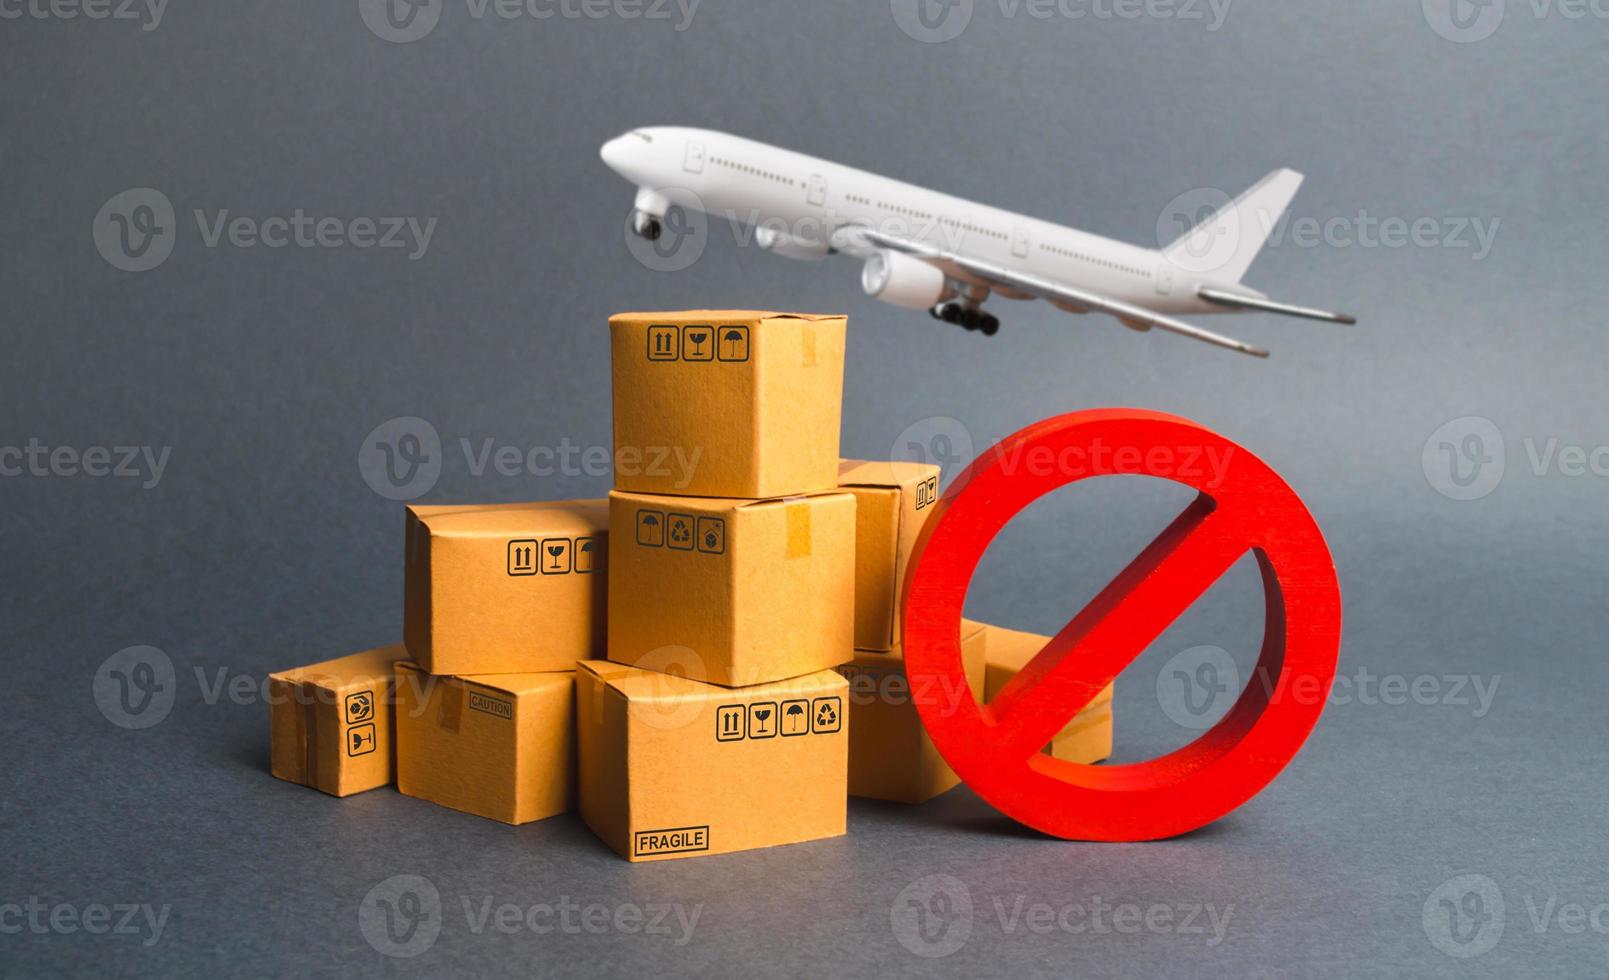 Cargo plane, many boxes and red prohibition symbol NO. Embargo trade wars. Restriction on importation, ban transit export dual-use goods to countries under sanctions. transport companies. photo